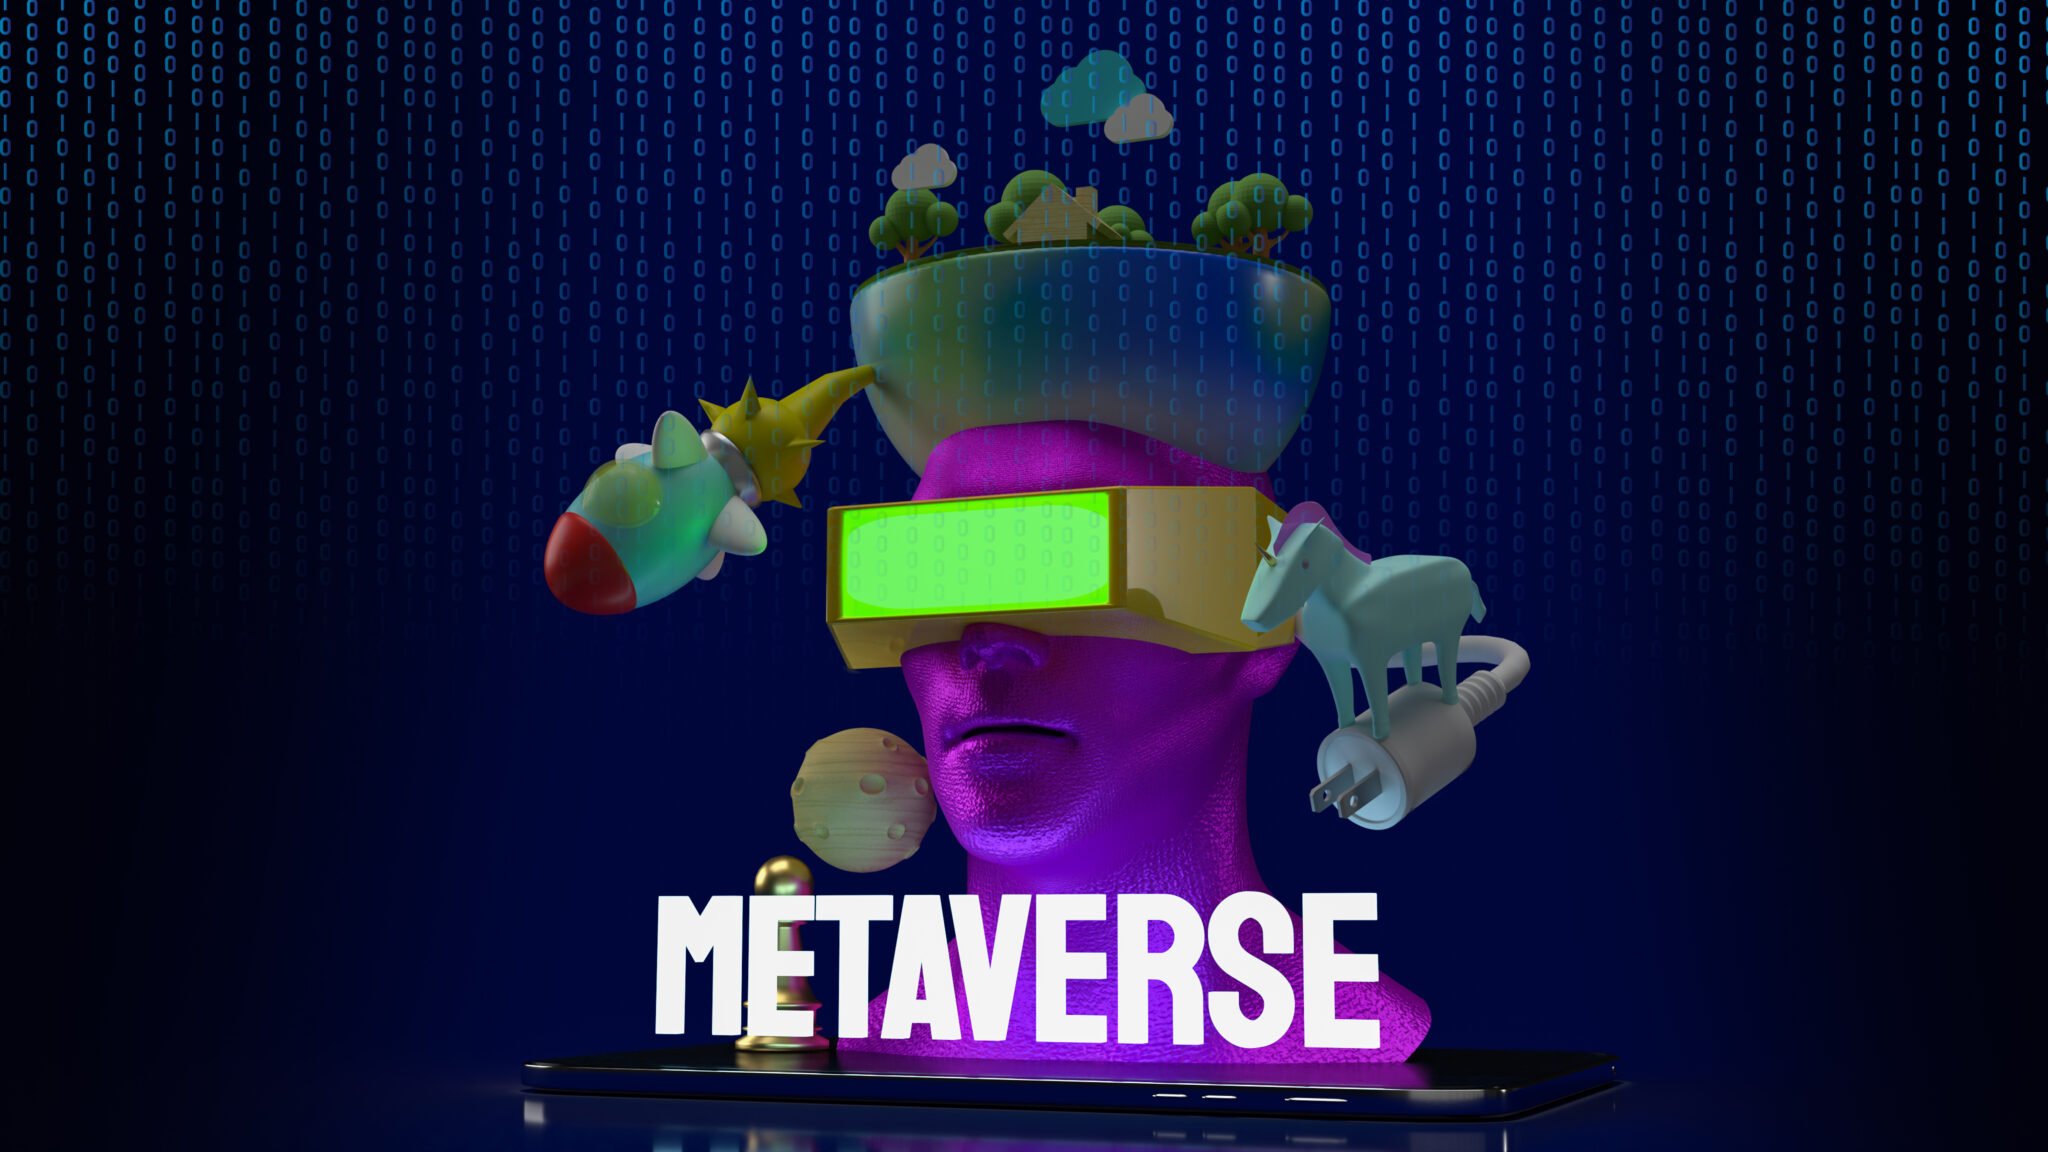 The question of metaverse interoperability